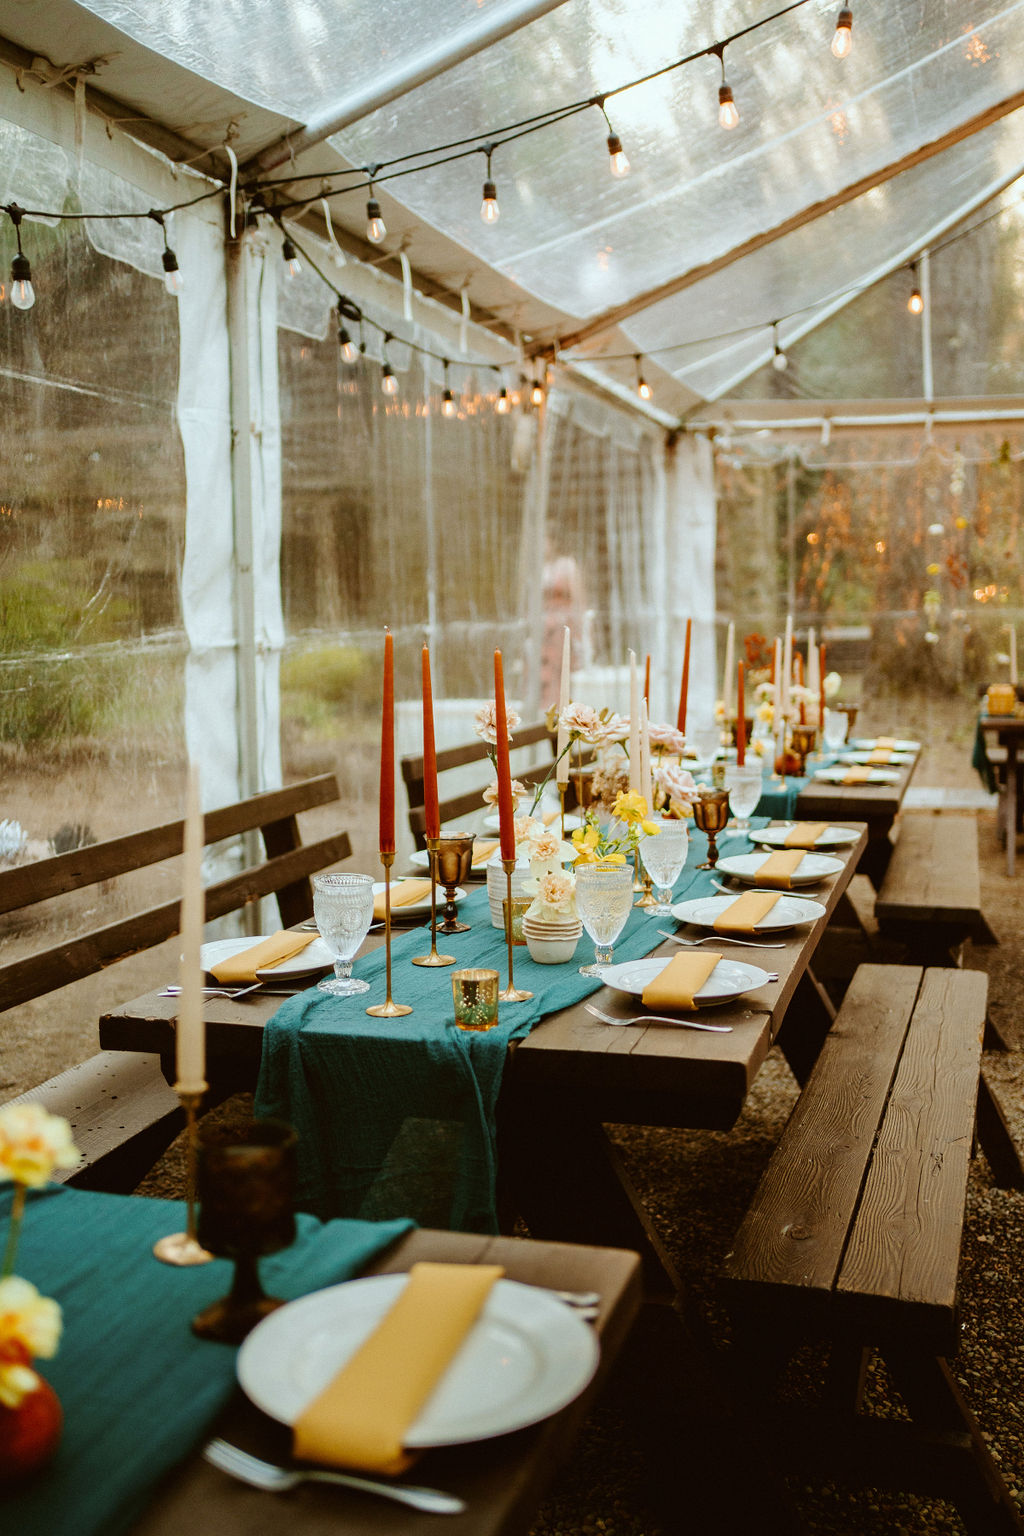 Guest tables that have a deep green table runner with small florals and tapper candles and wooden benches for seating